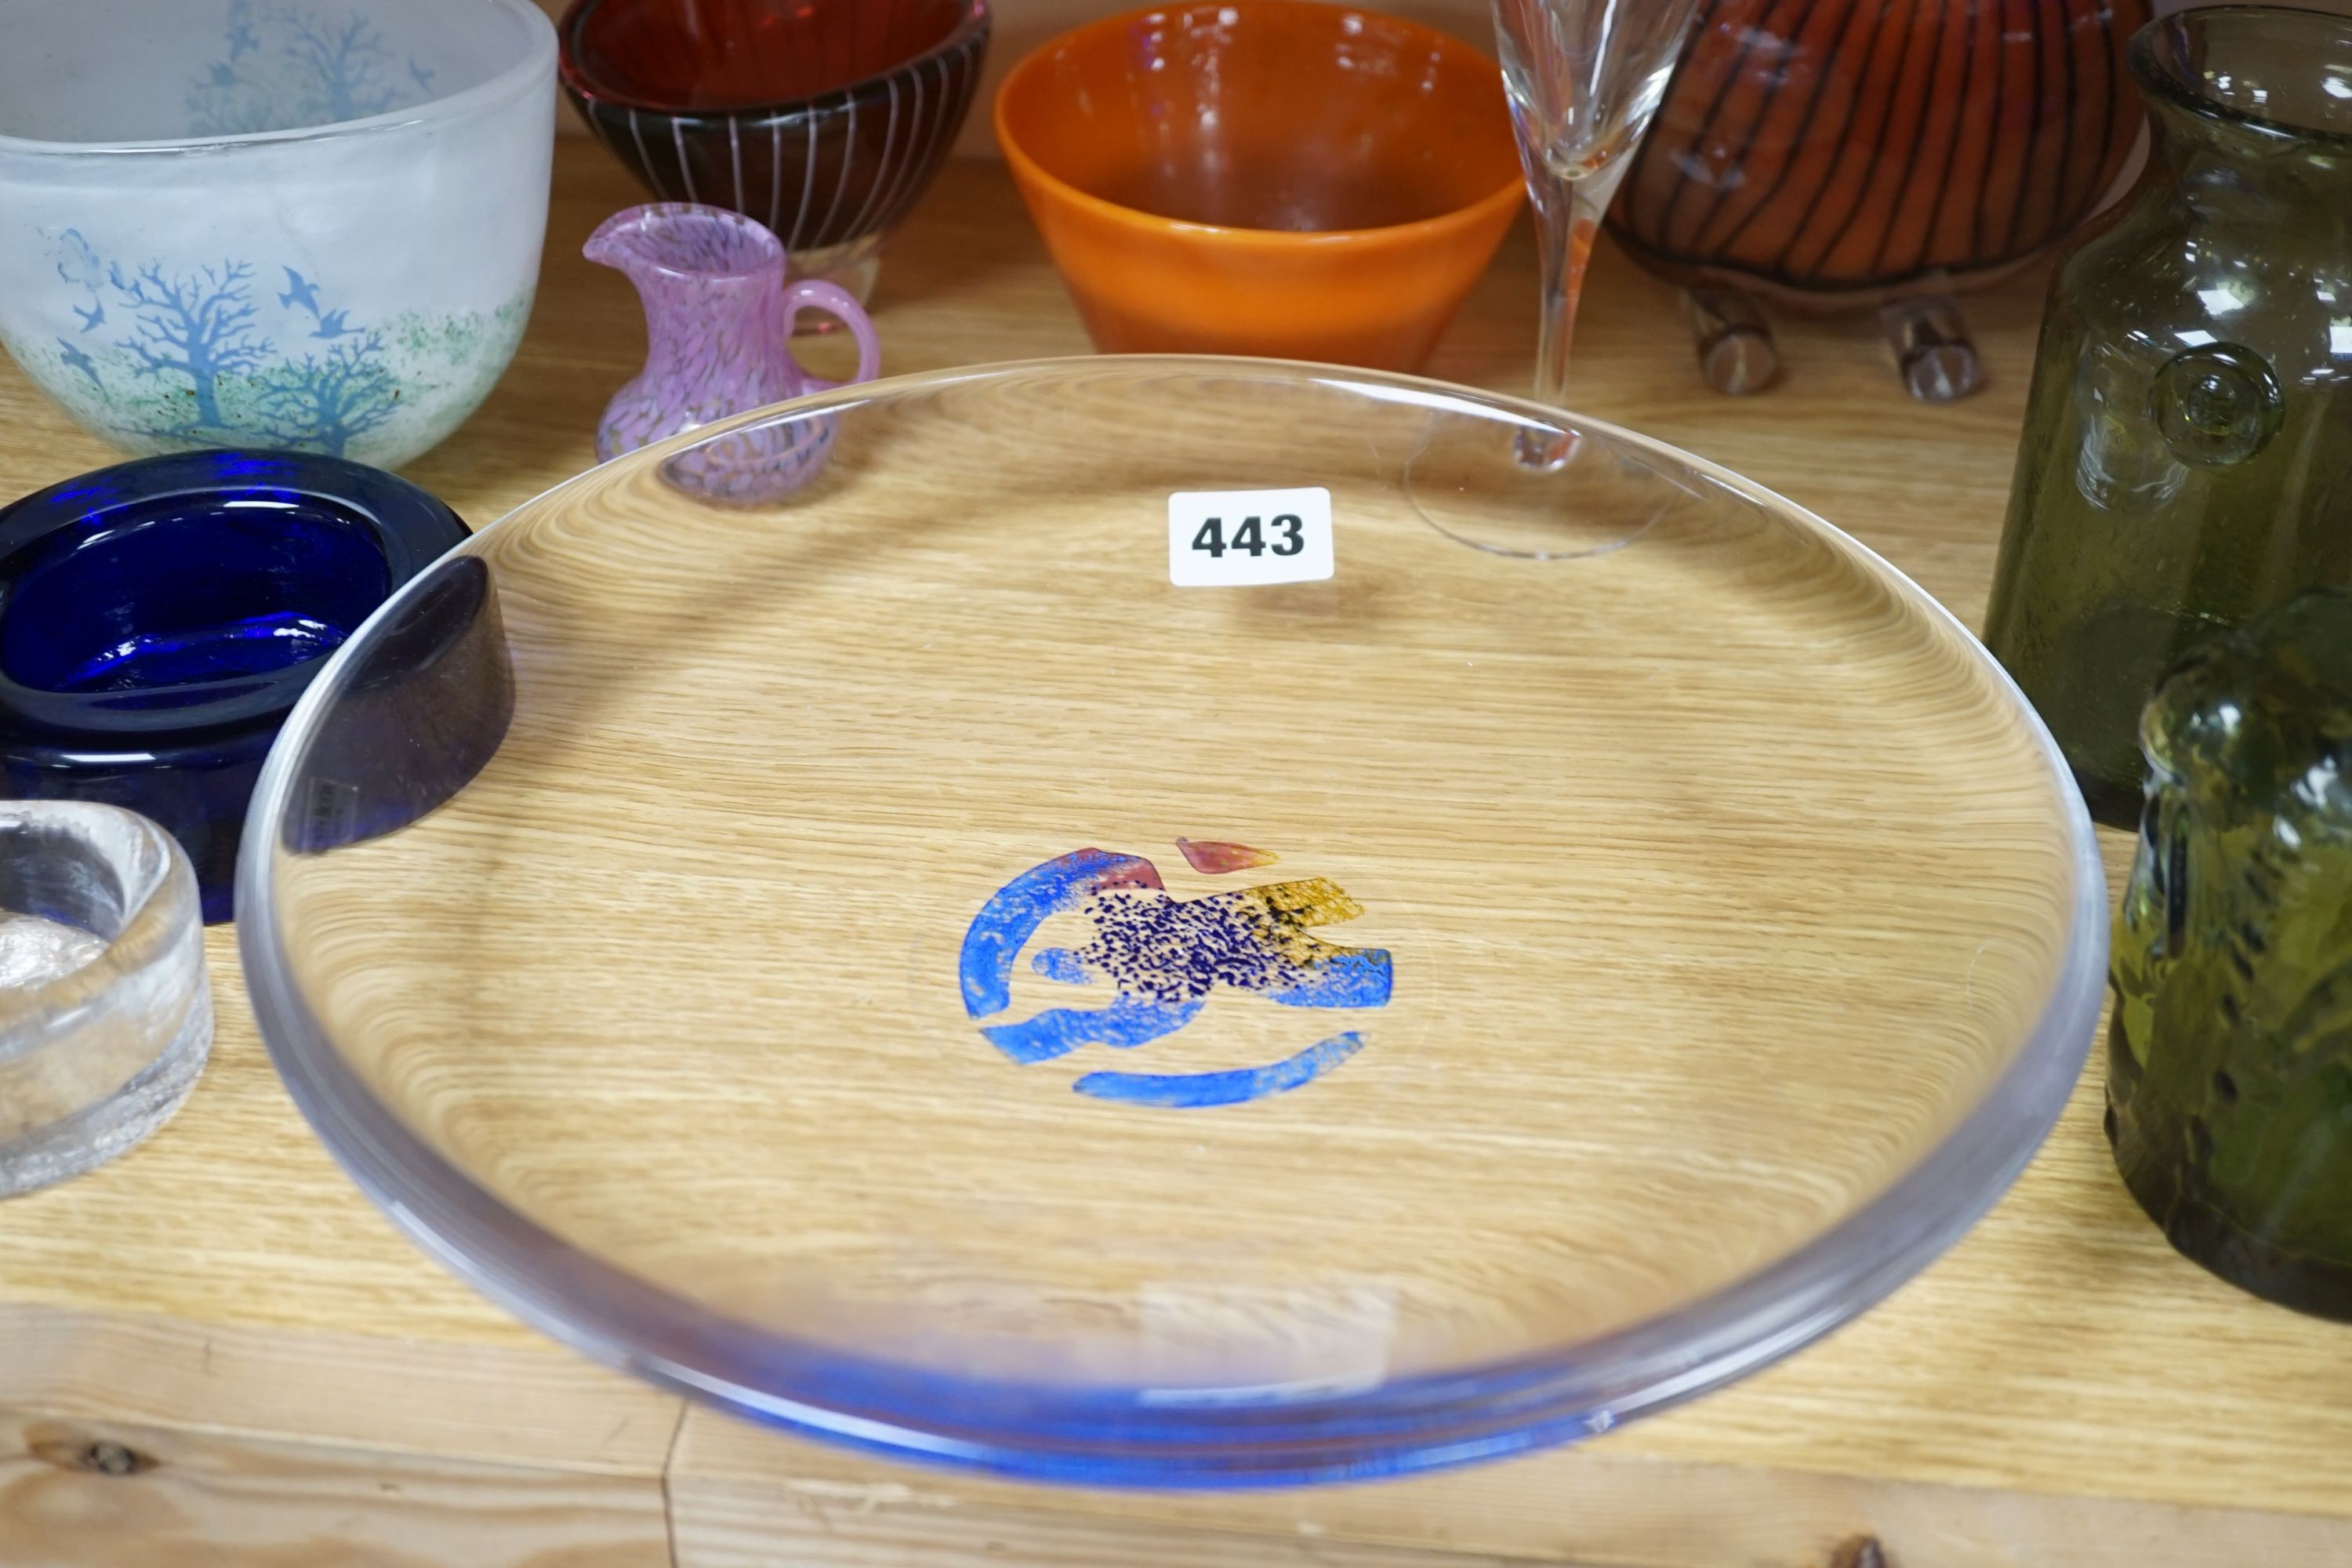 A Kosta Boda Bertil Vallien art glass dish, signed, No.79282 together with other Kosta Boda and Boda glassware-, dish 29.5 cms diameter.